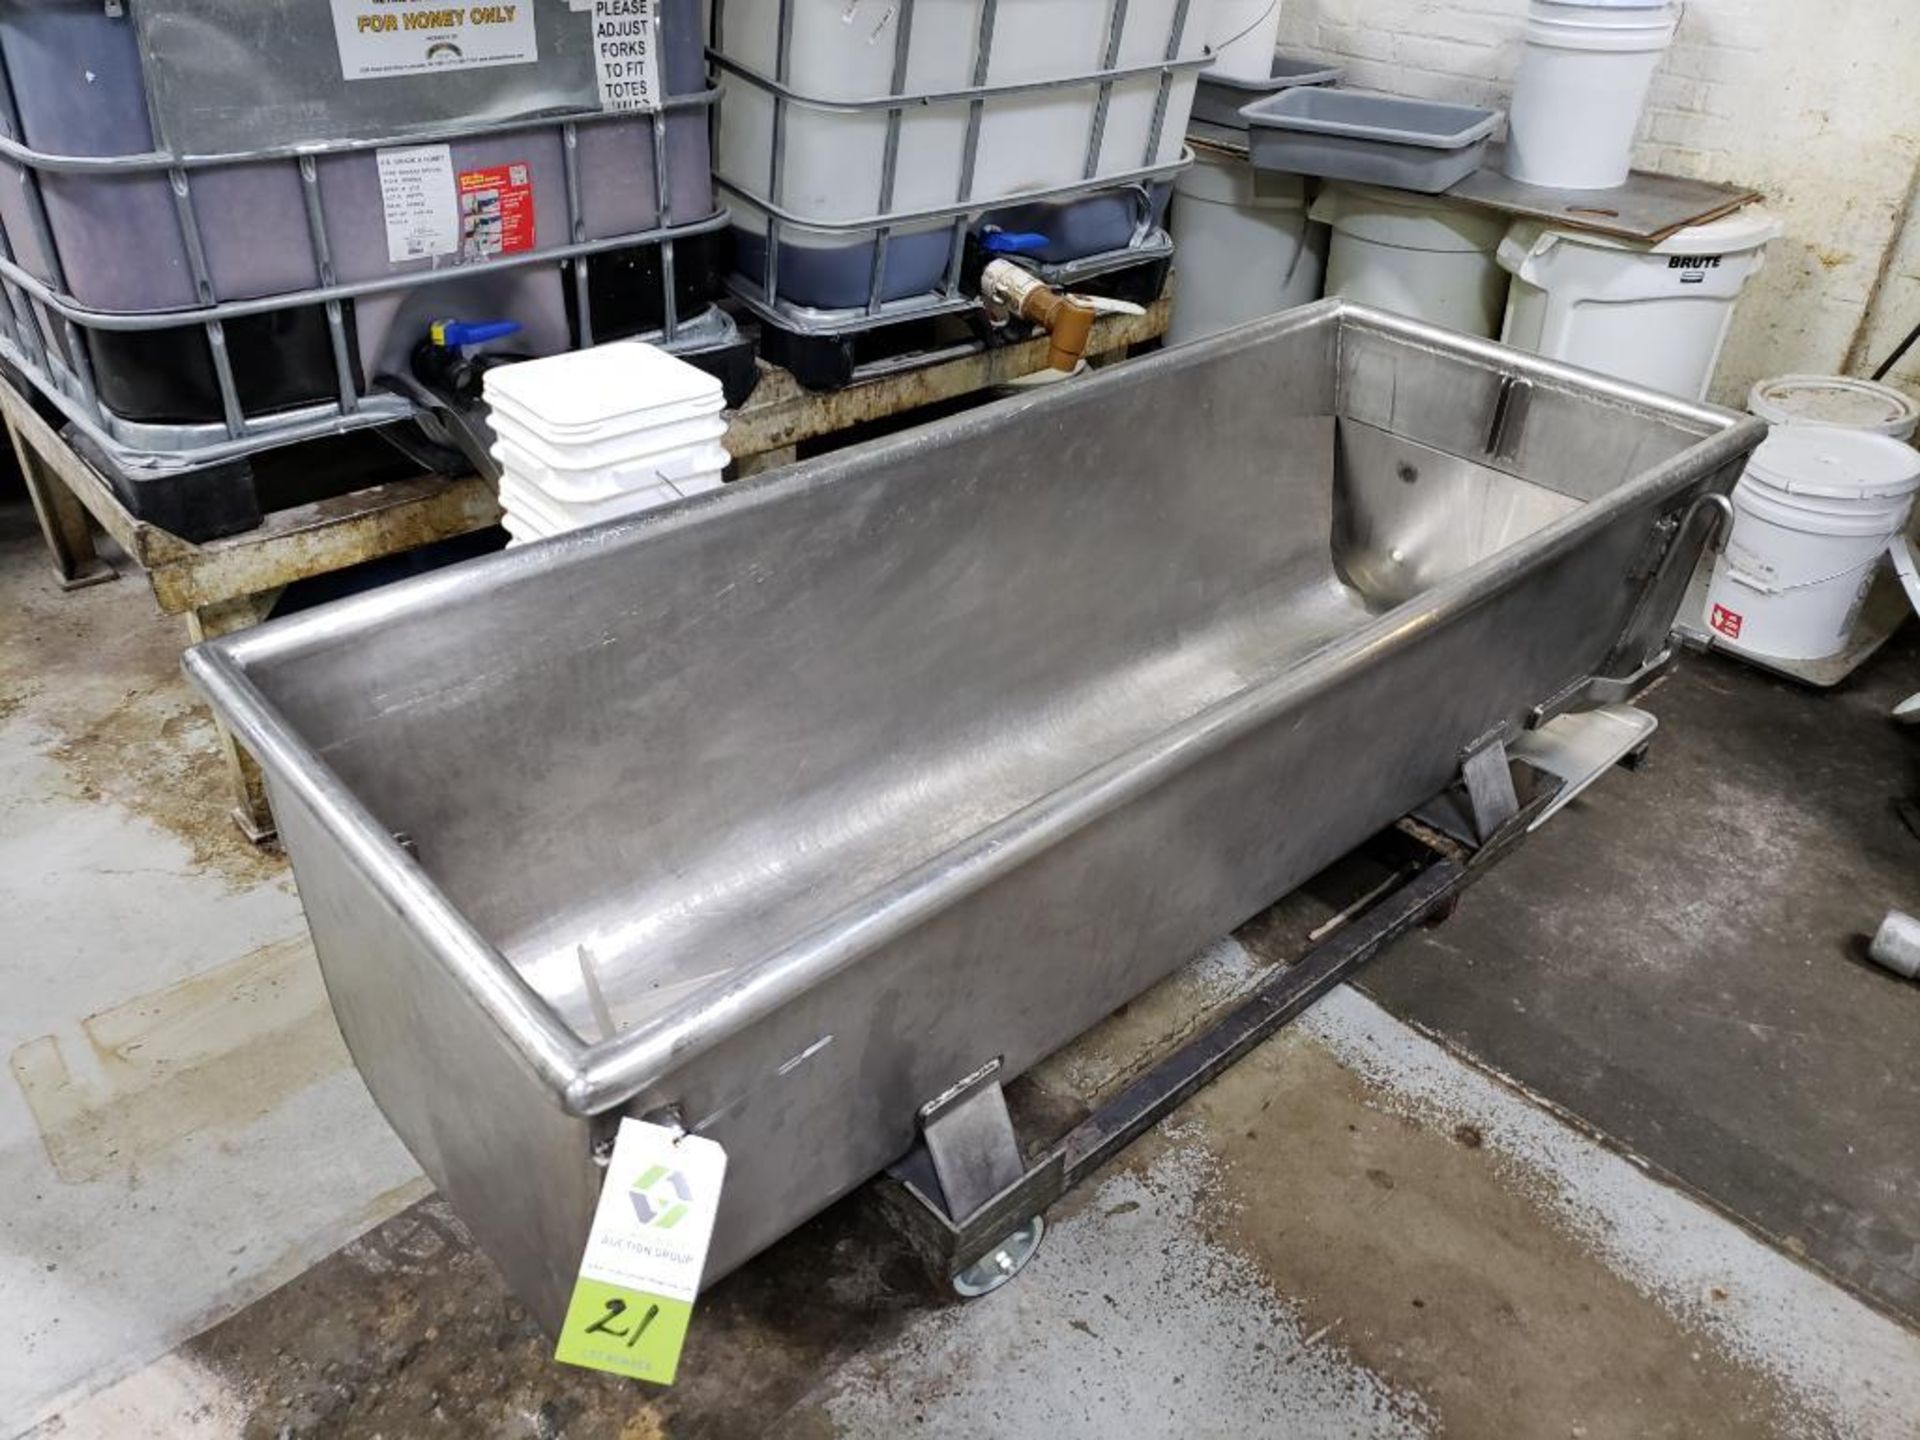 Stainless Steel Dough Trough